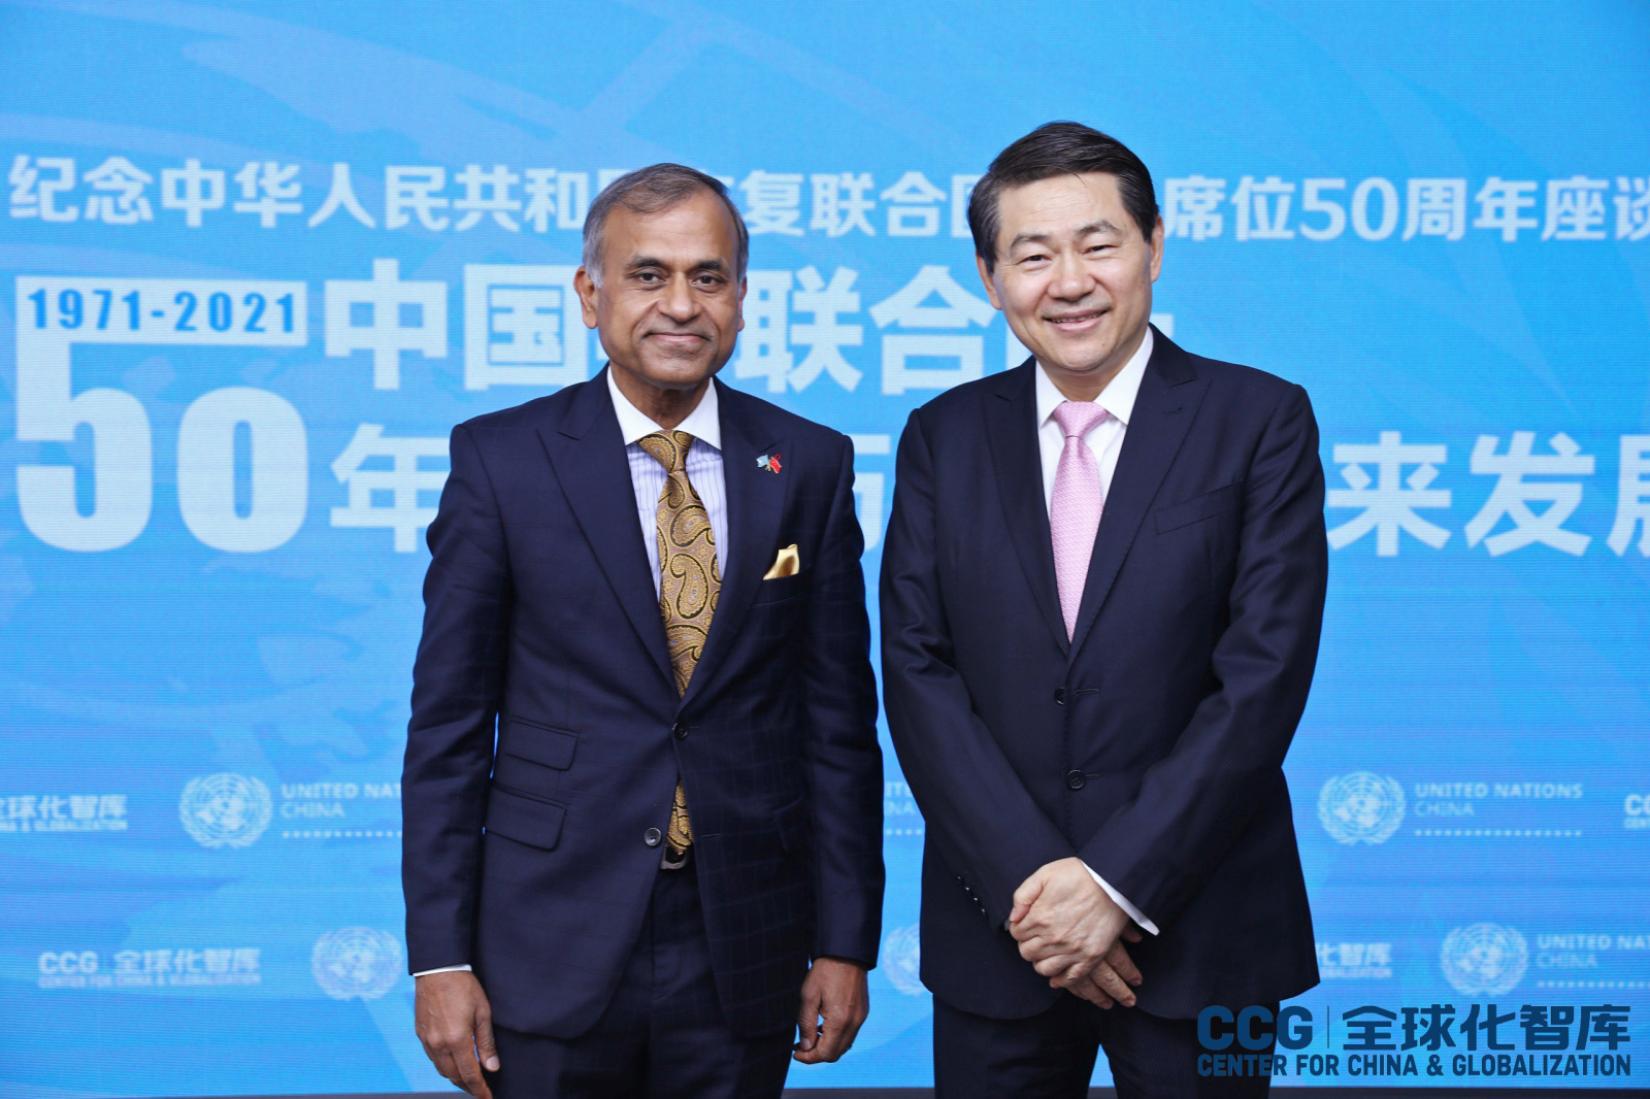 UN Resident Coordinator in China, Siddharth Chatterjee (left) and President of Center for China and Globalization, Wang Huiyao (right)